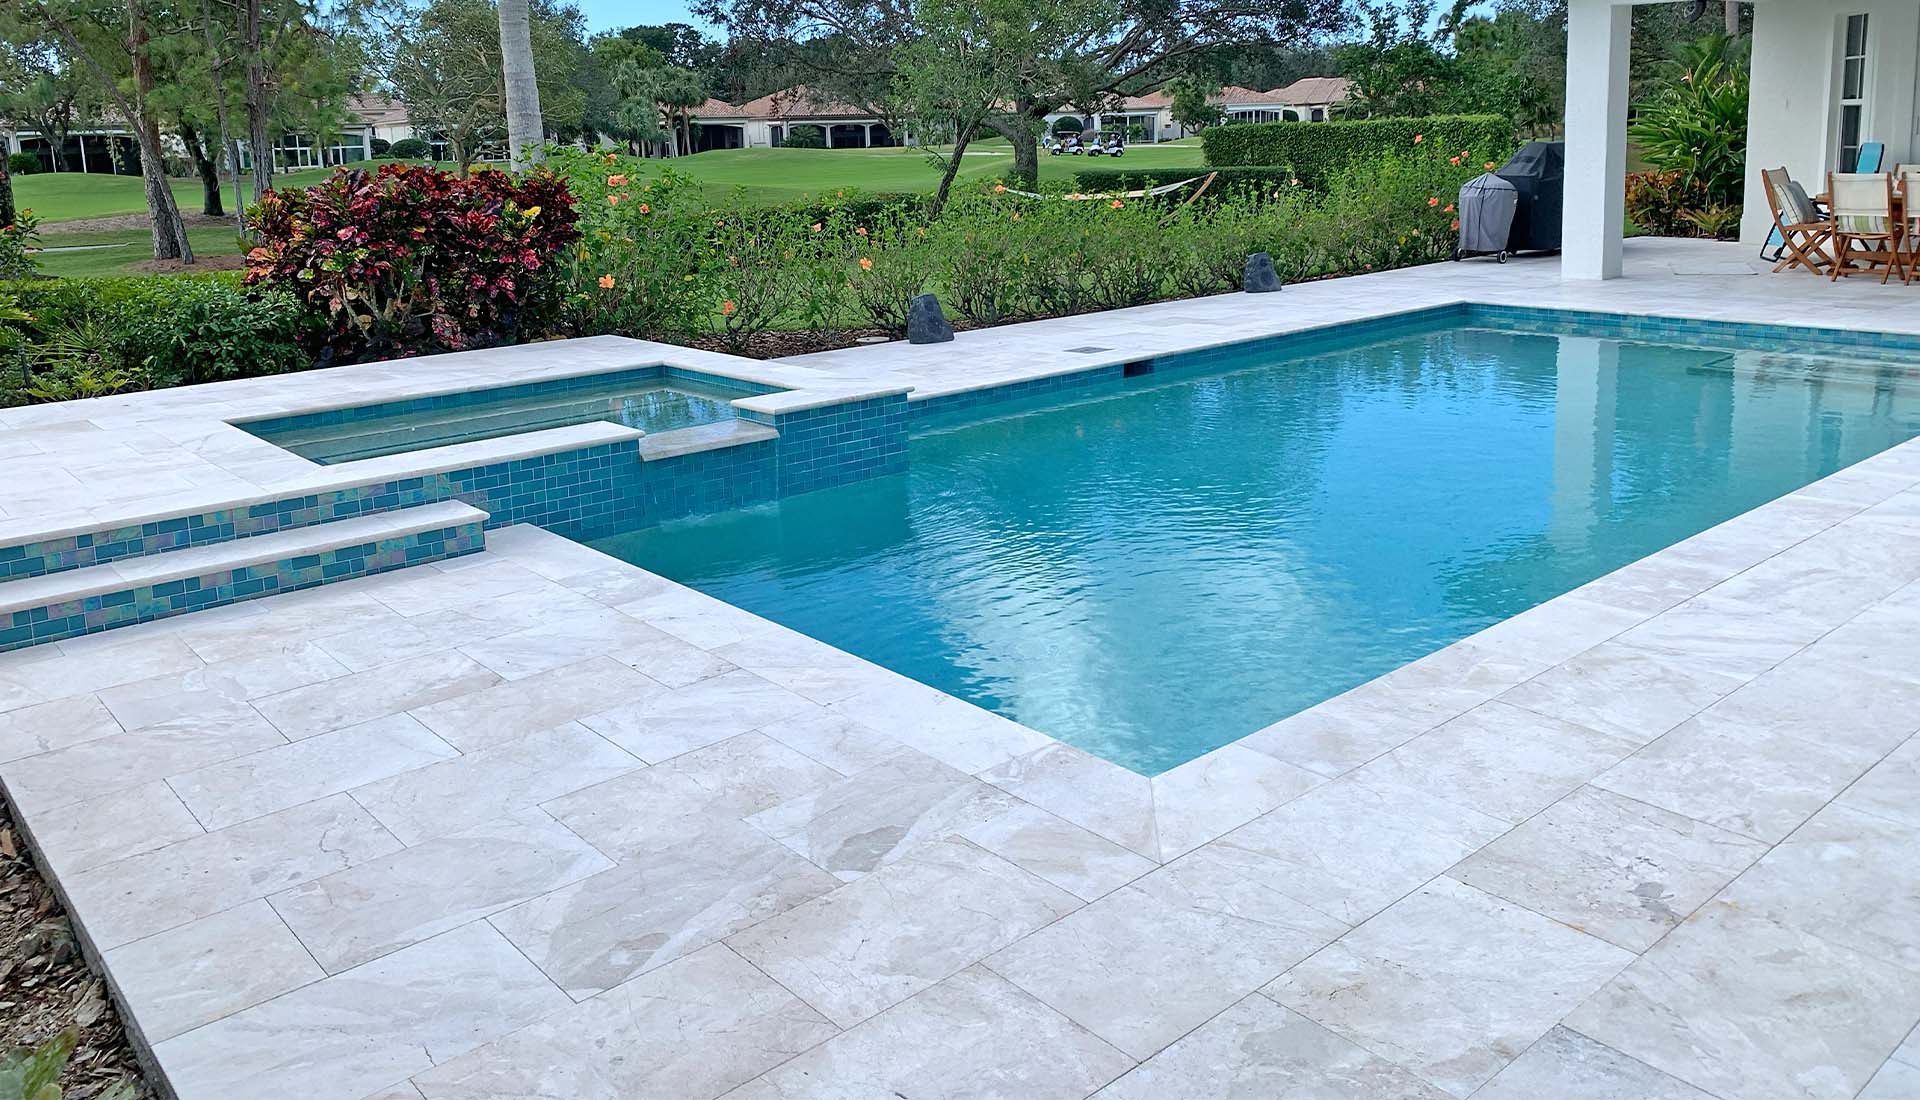 New pool and deck renovation by Pool and Deck Concepts, Naples, FL